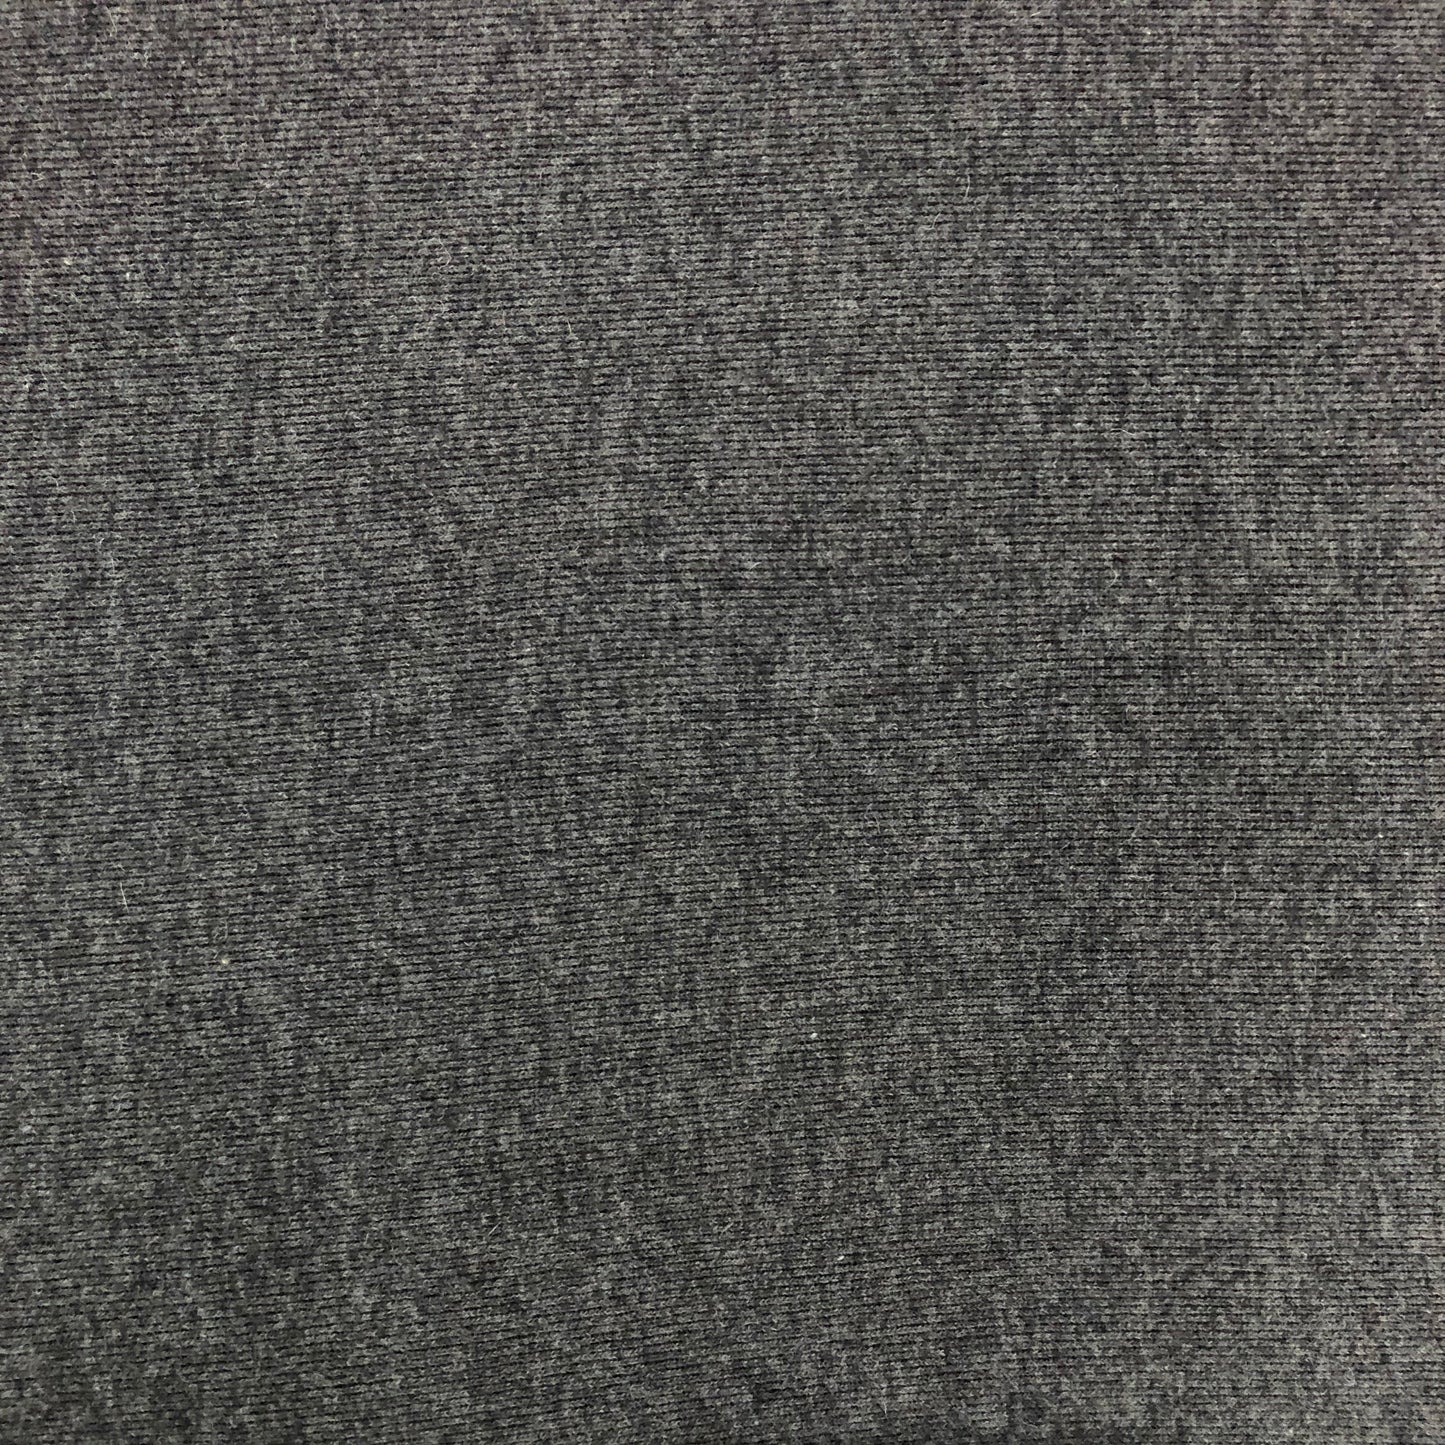 43% Wool / 38% Polyester / 19% Nylon Soft Double Face, Black/Grey (Sold per Yard)